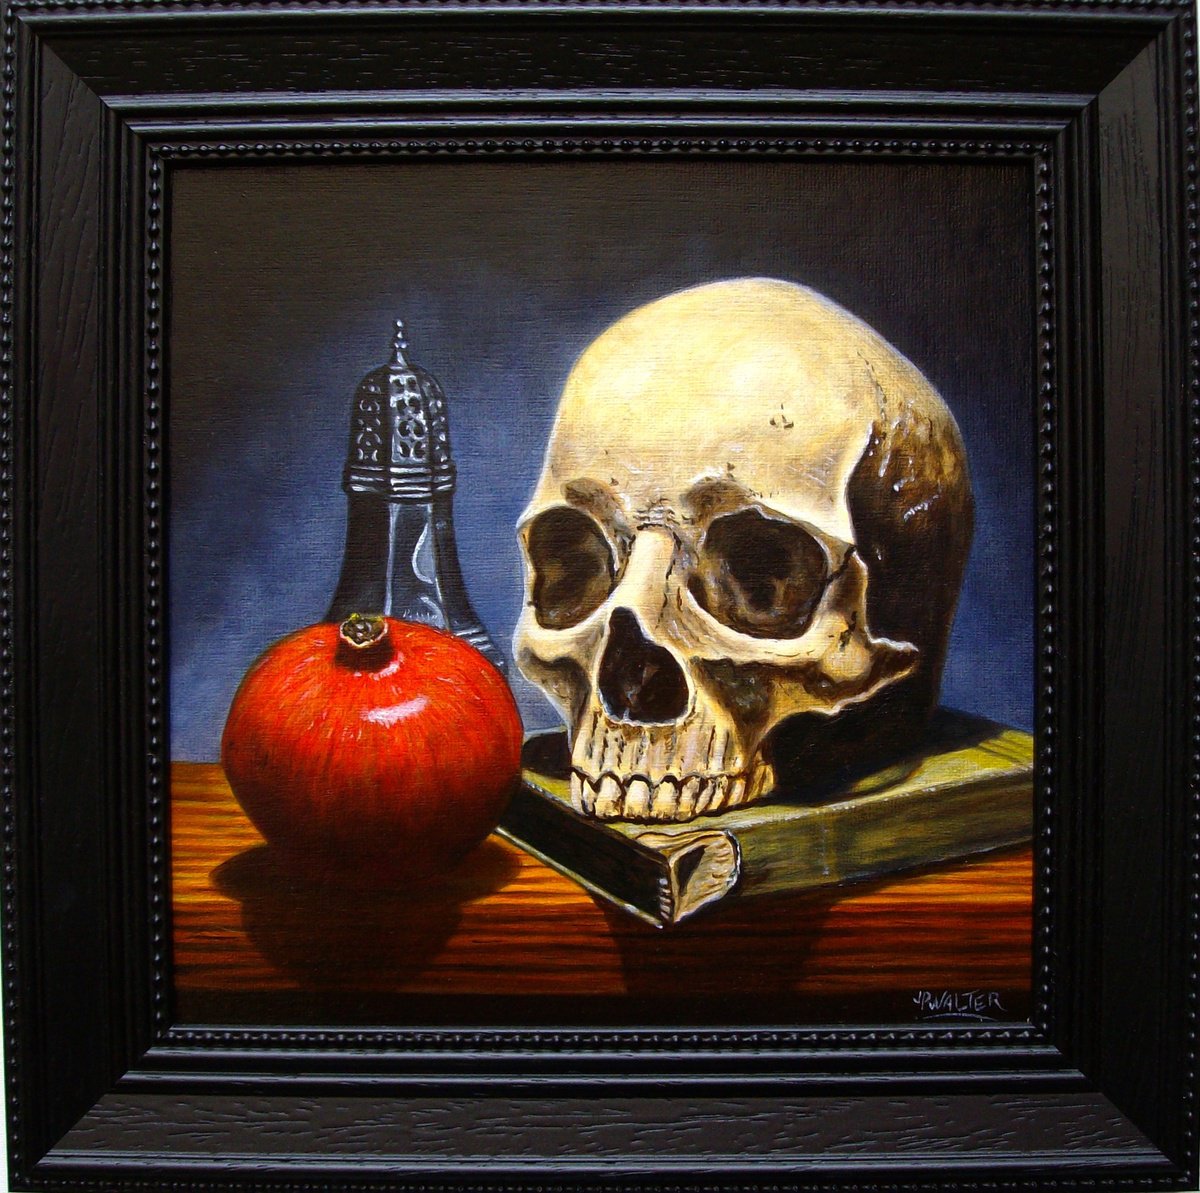 Skull on book with pomegranate by Jean-Pierre Walter